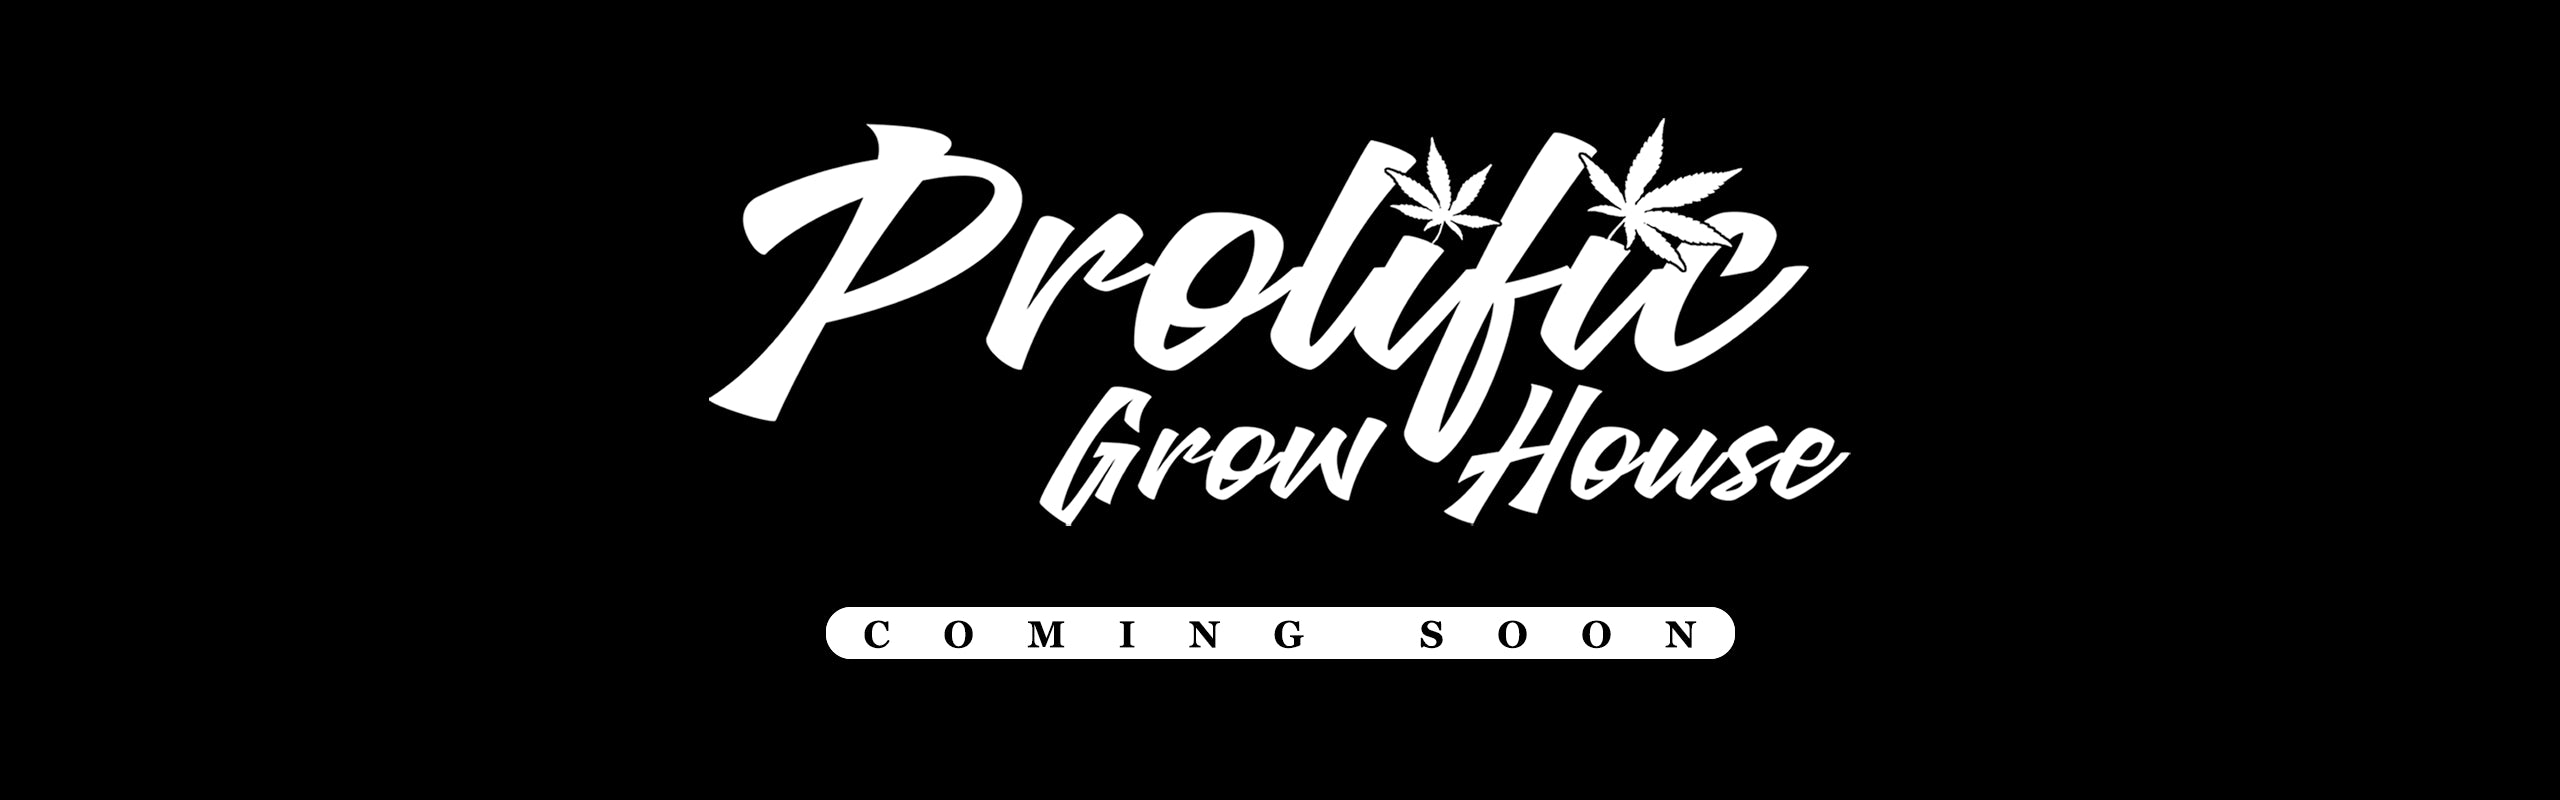 Prolific Growhouse - Coming Soon! banner